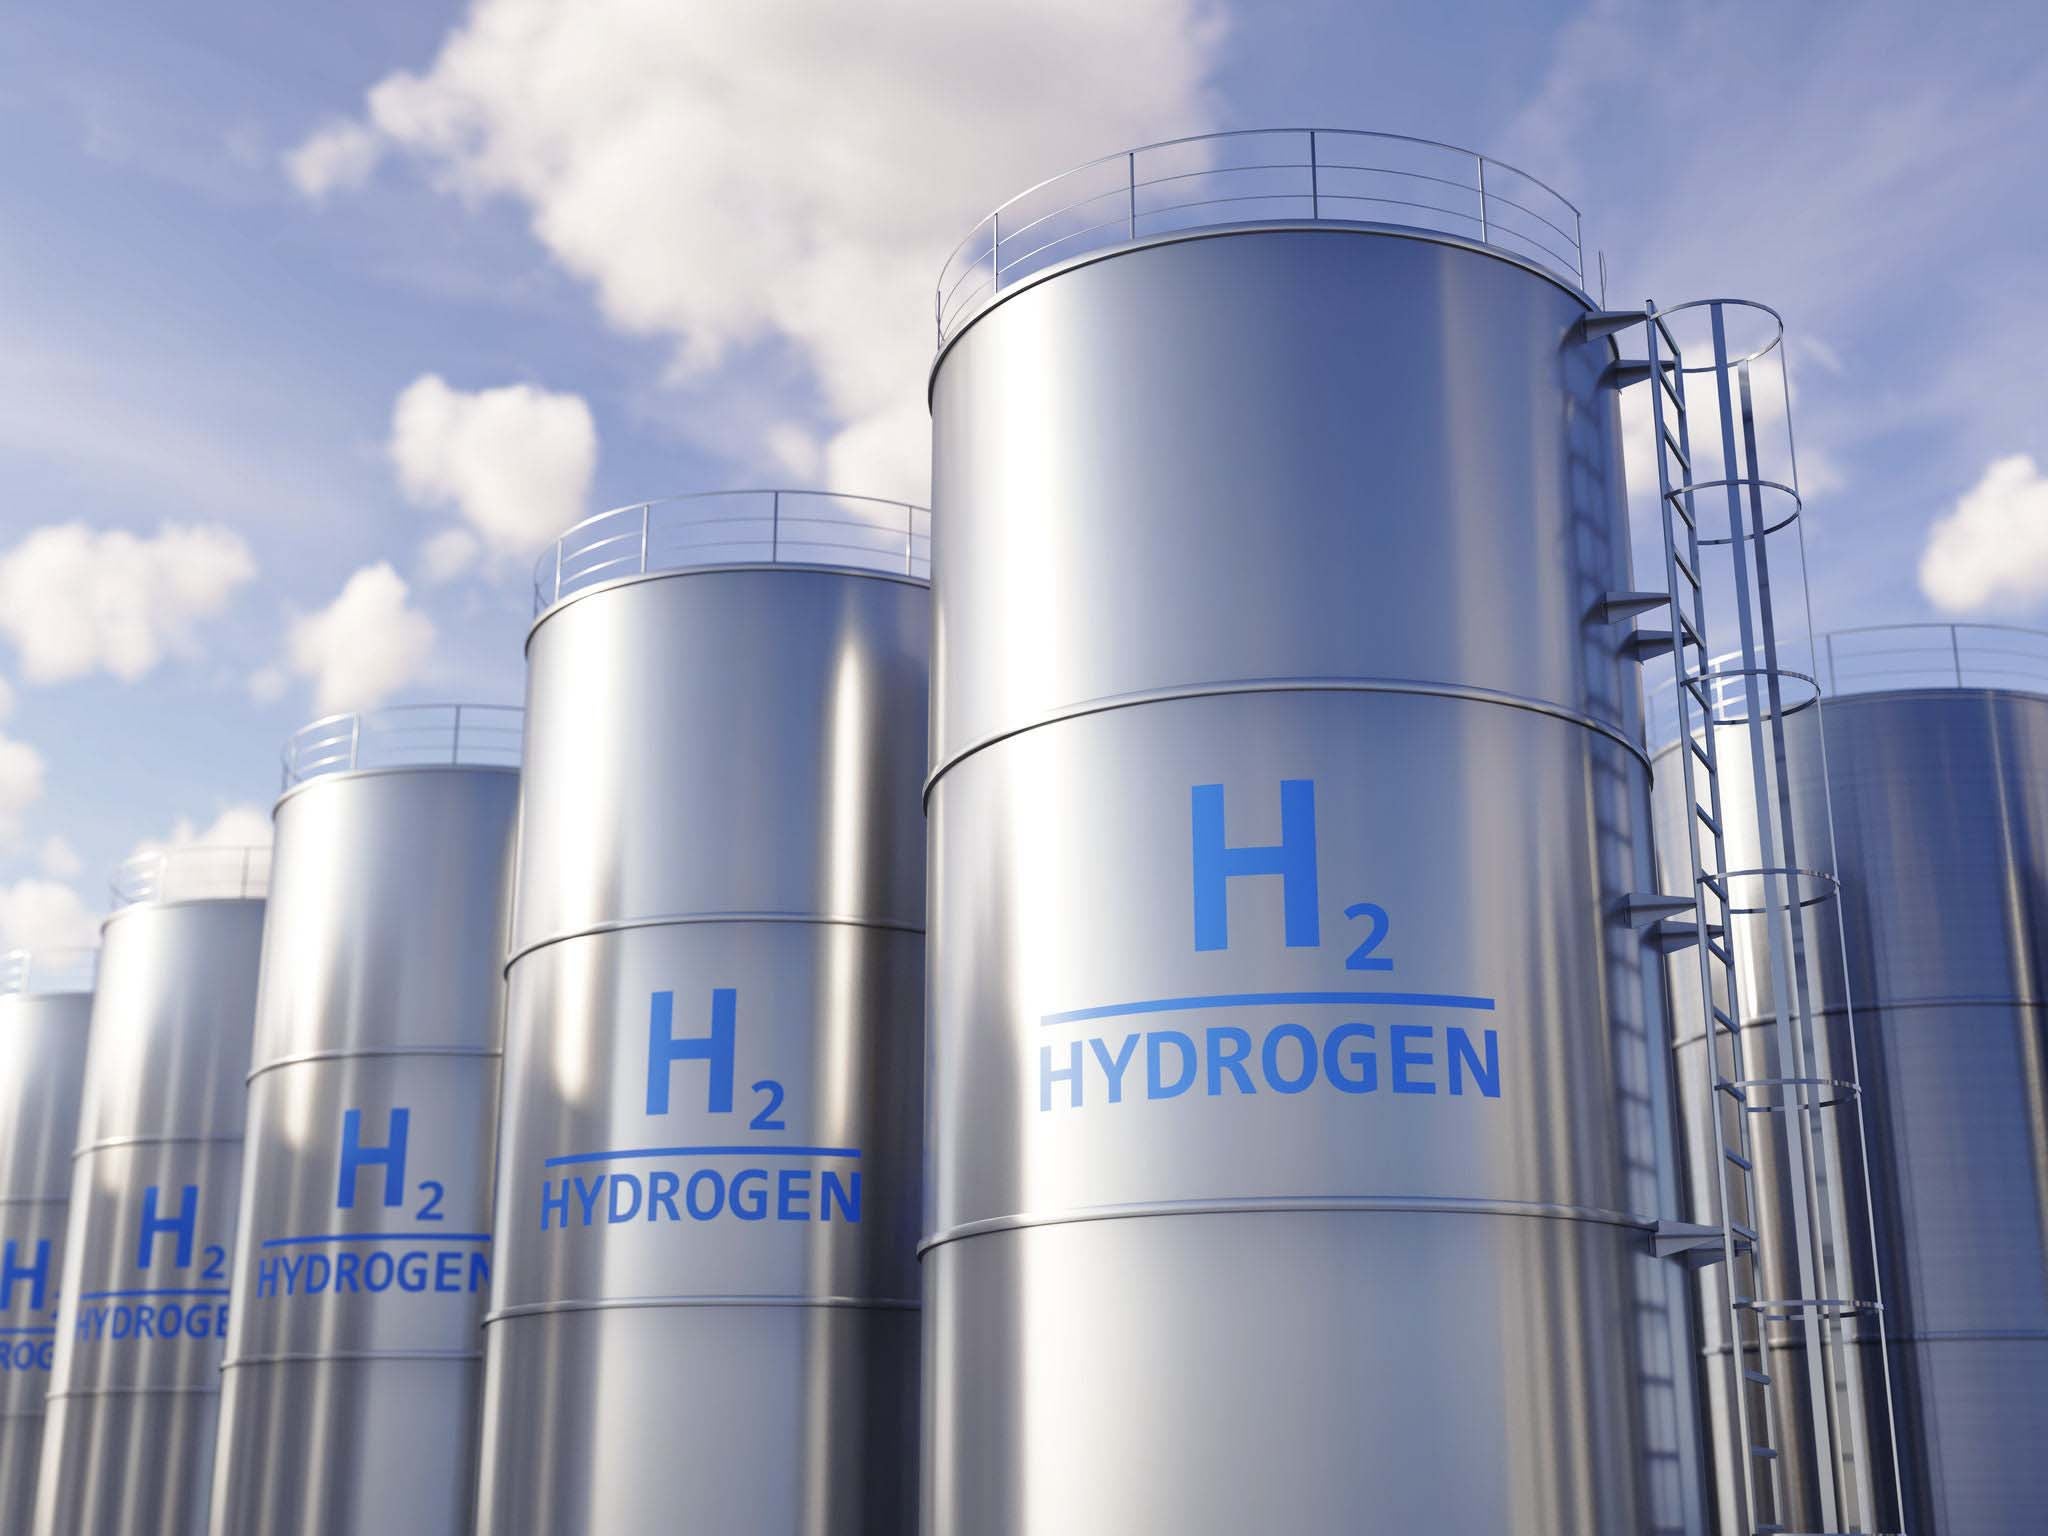 Specialty gas hydrogen tanks for advancing the widespread adoption of liquid hydrogen as an environmentally sustainable energy source